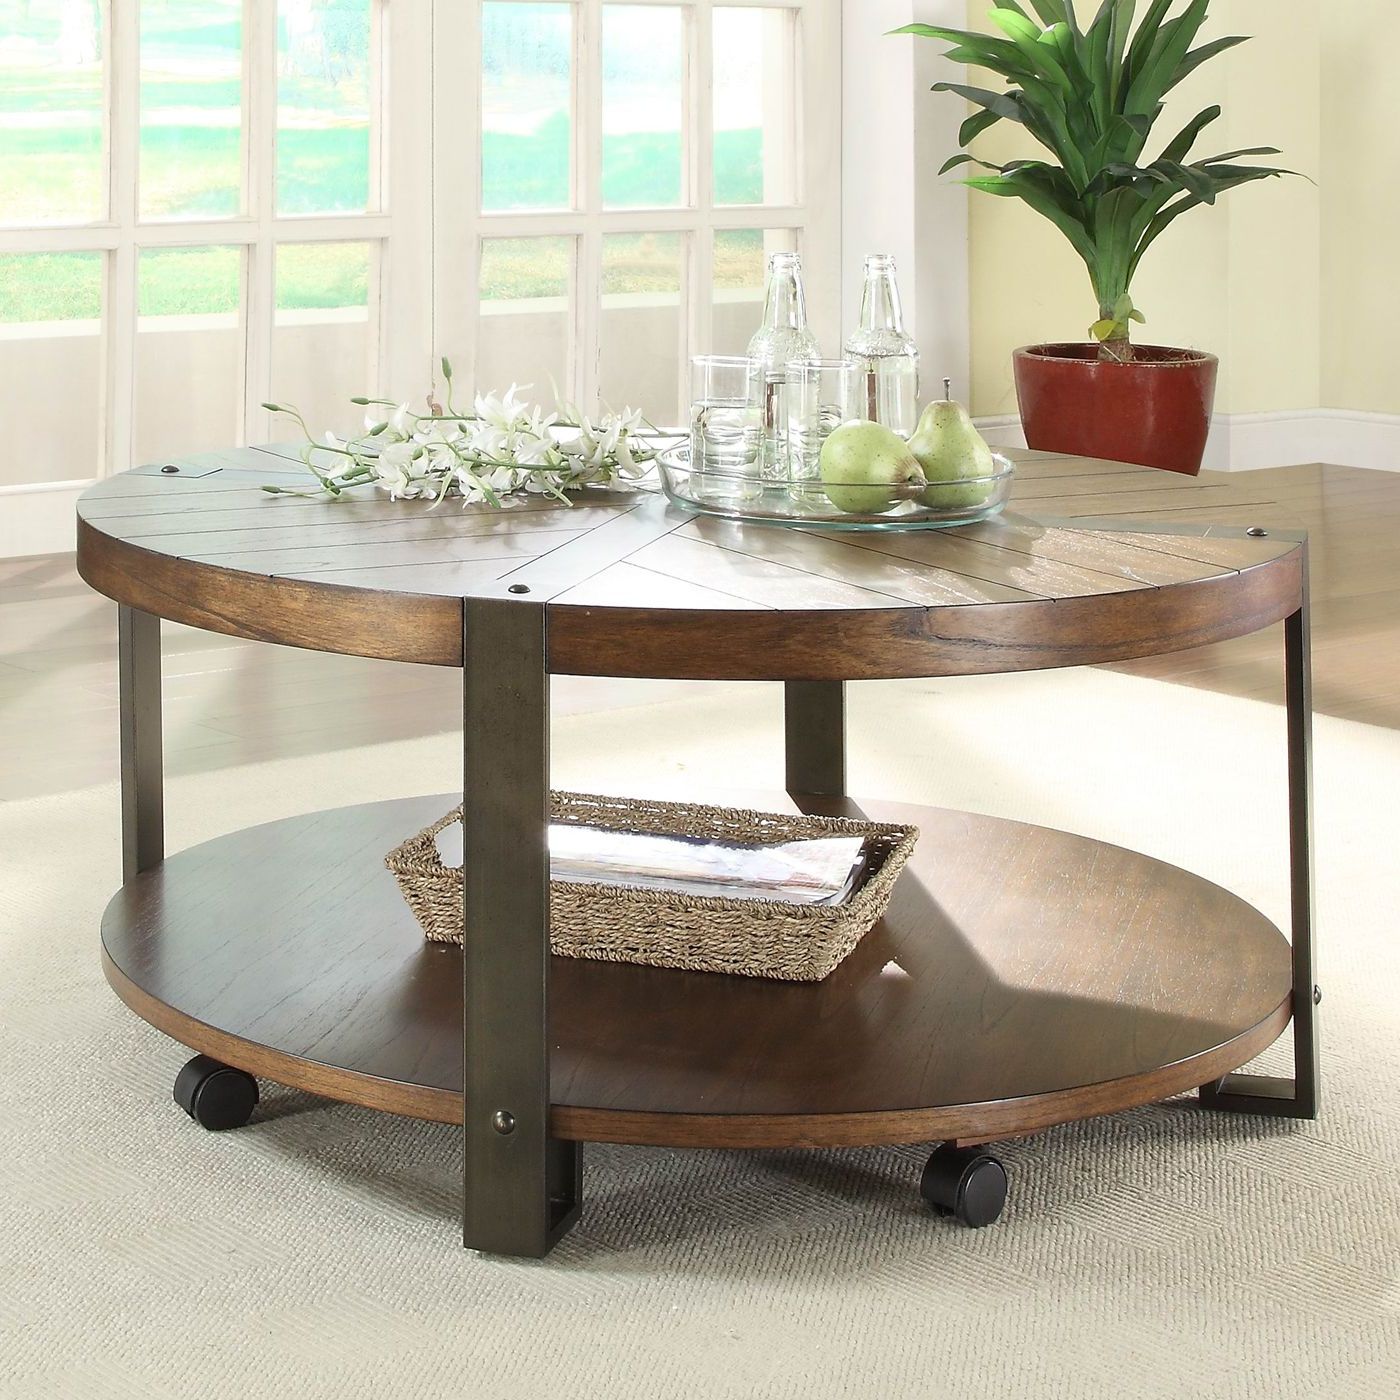 Homelegance 3438 01 Northwood Round Cocktail Table On Casters (View 14 of 15)